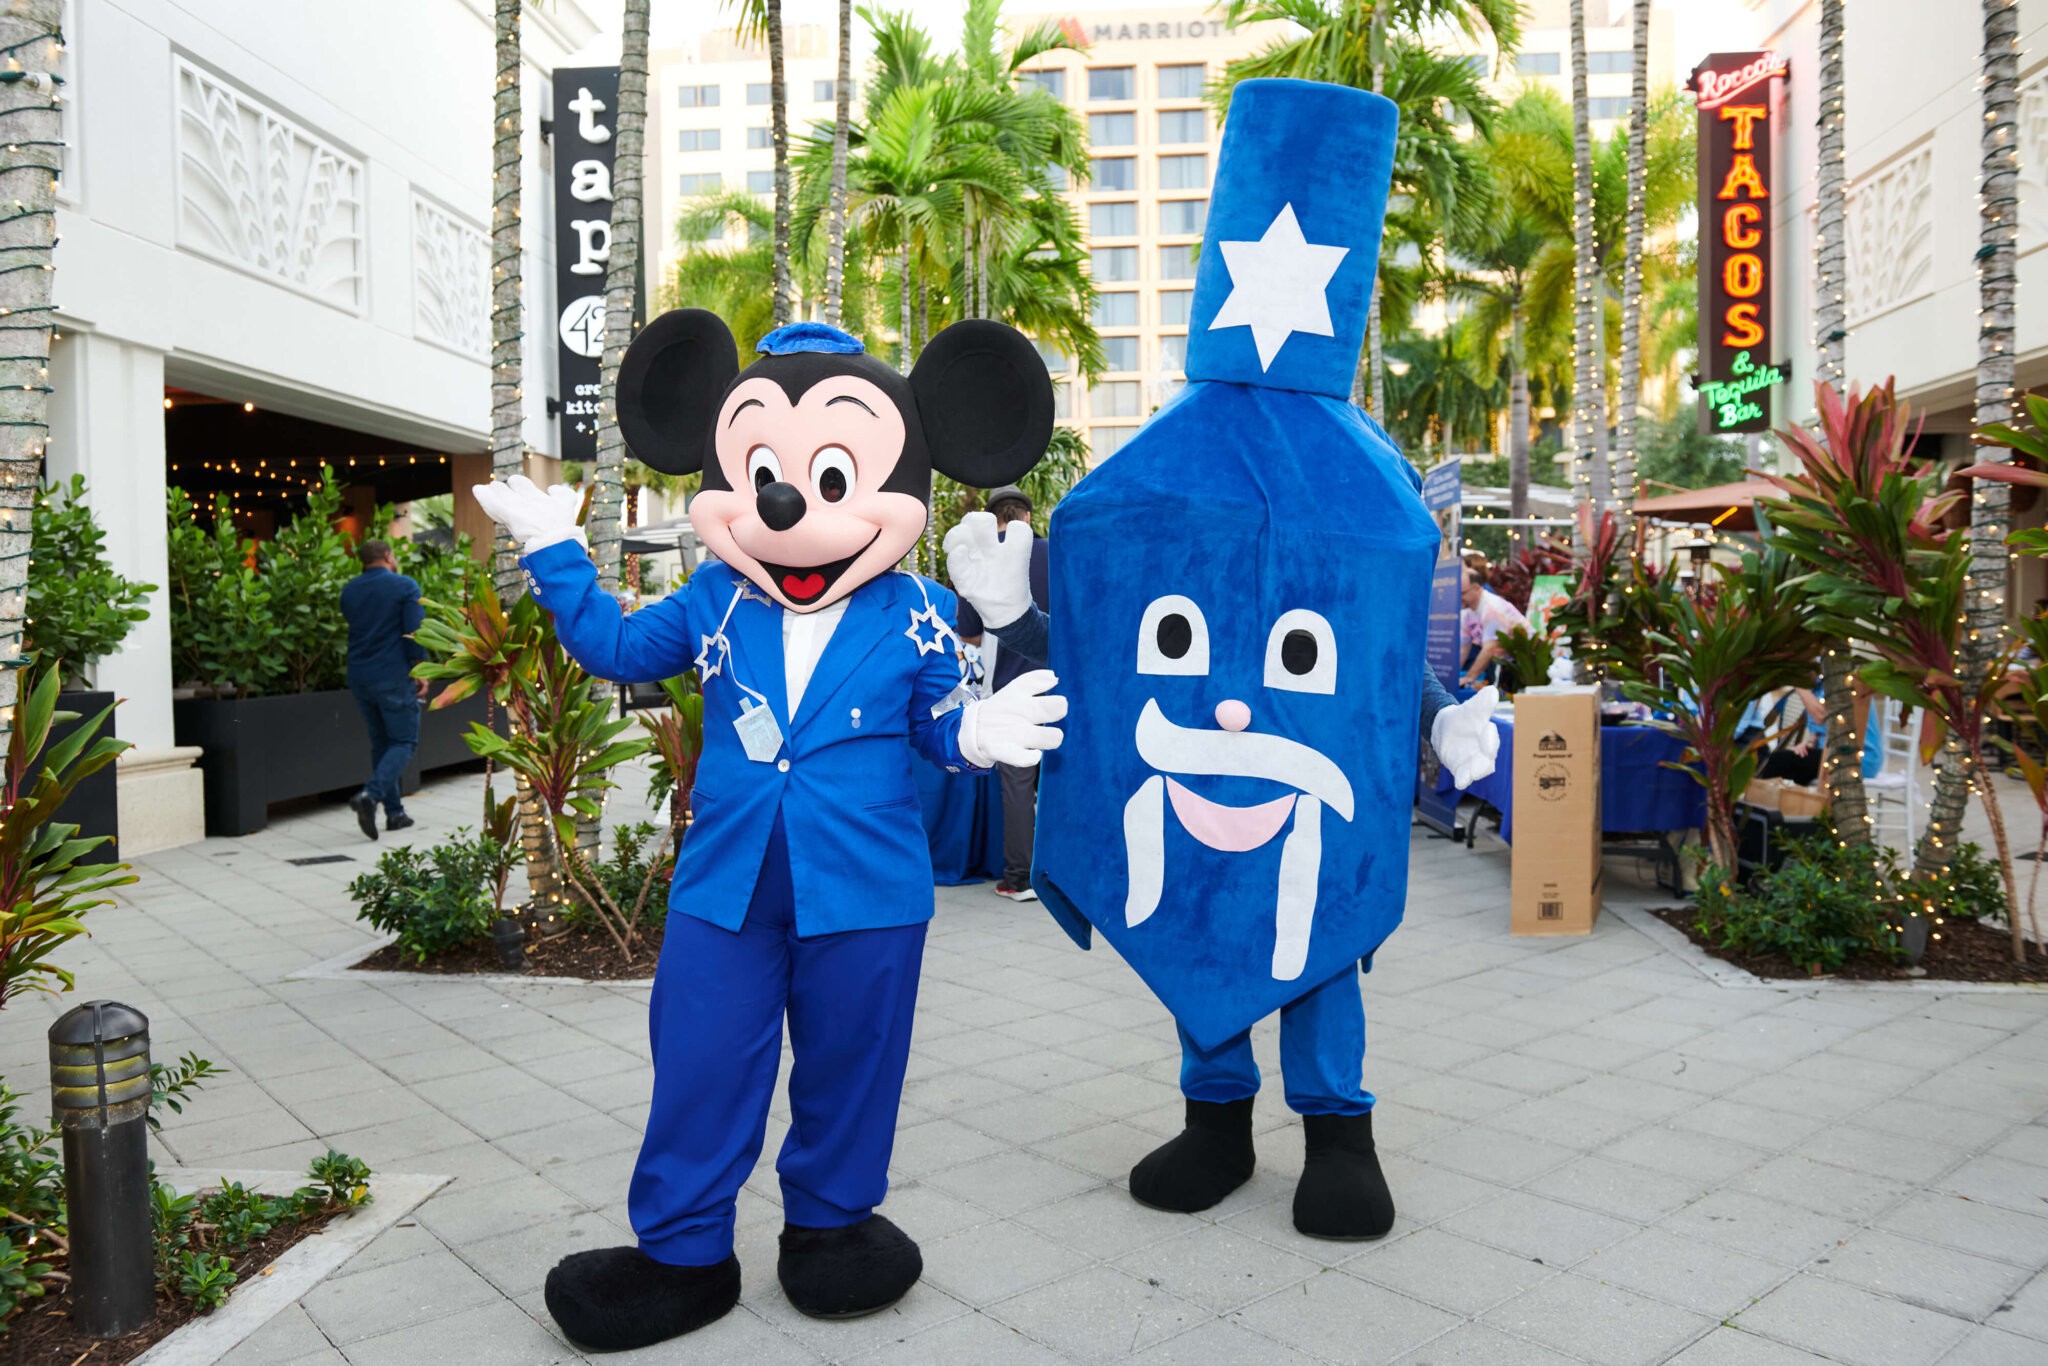 Chanukah Mickey Mouse and dreidel will join the Community-wide Chanukah Celebration in Boca